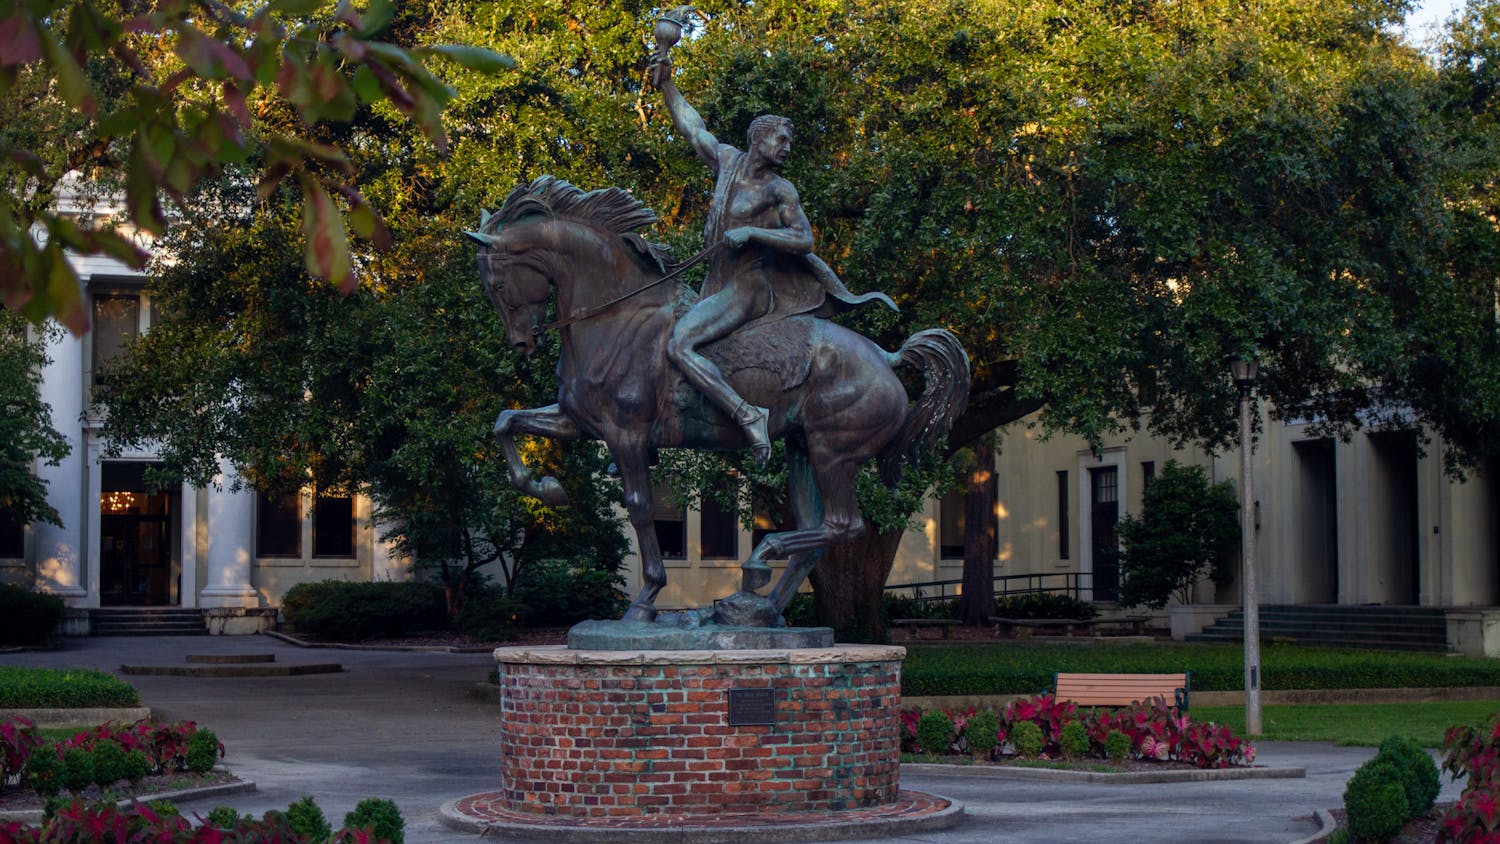 “The Torch Bearer” by Anna Hyatt Huntington stands in front of Wardlaw College on Sept. 12, 2022. Wardlaw College serves as the home of USC's College of Education.